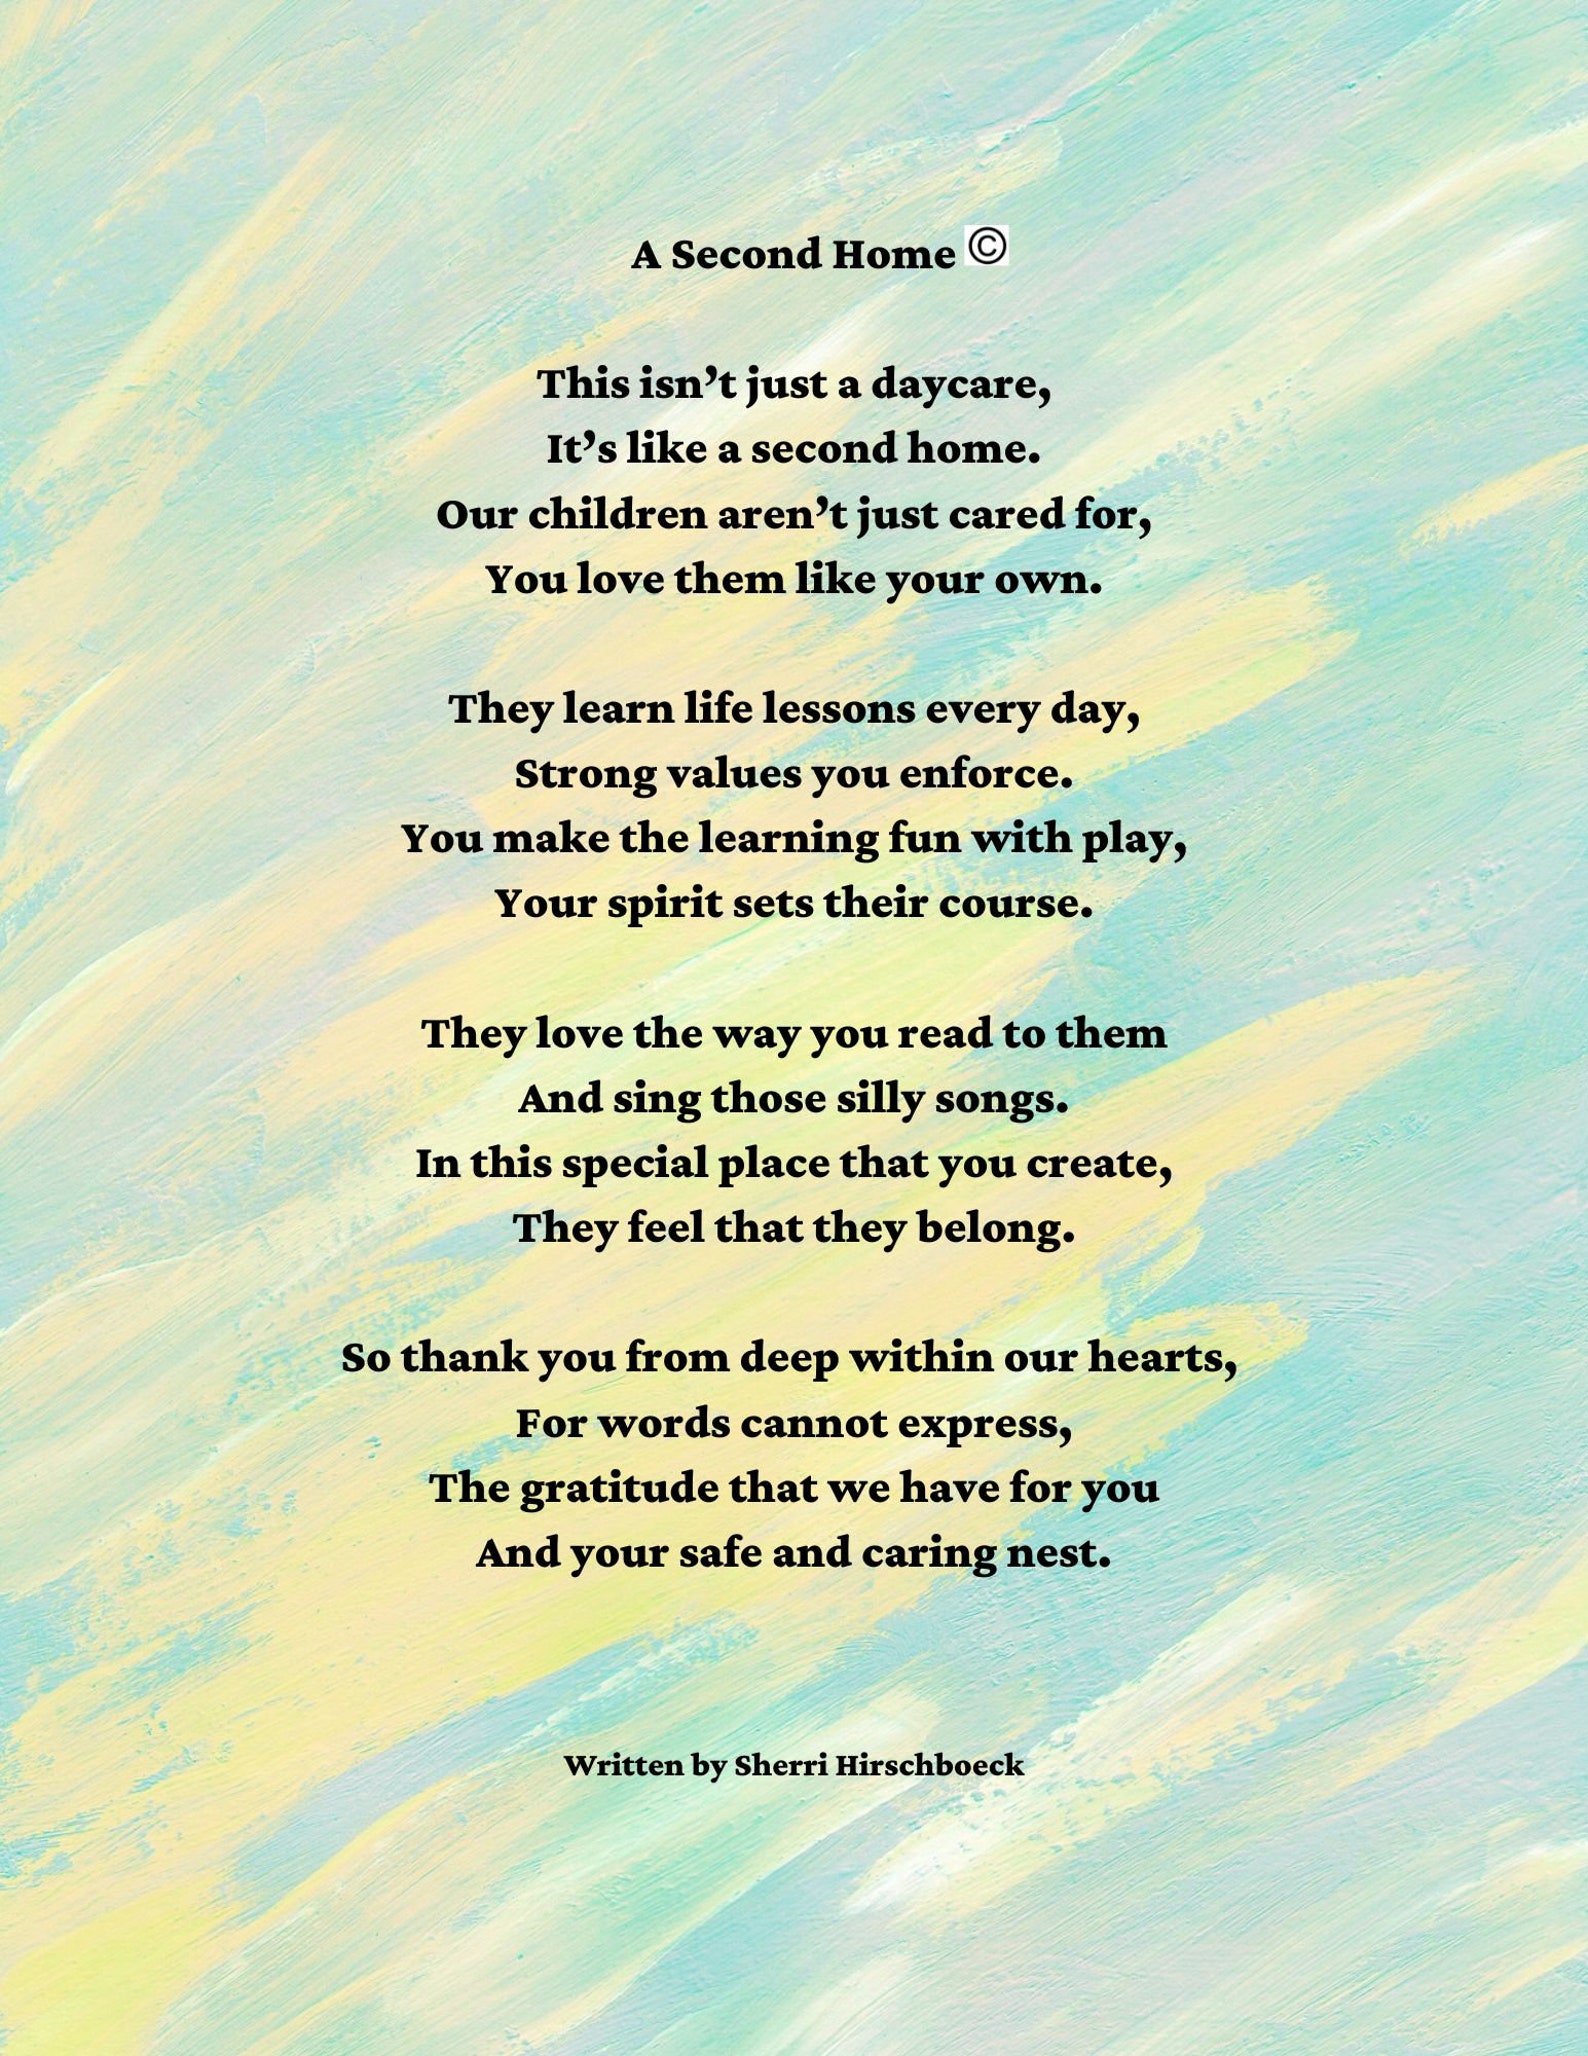 A Second Home Poem for Daycare Providers Poetry Printable - Etsy